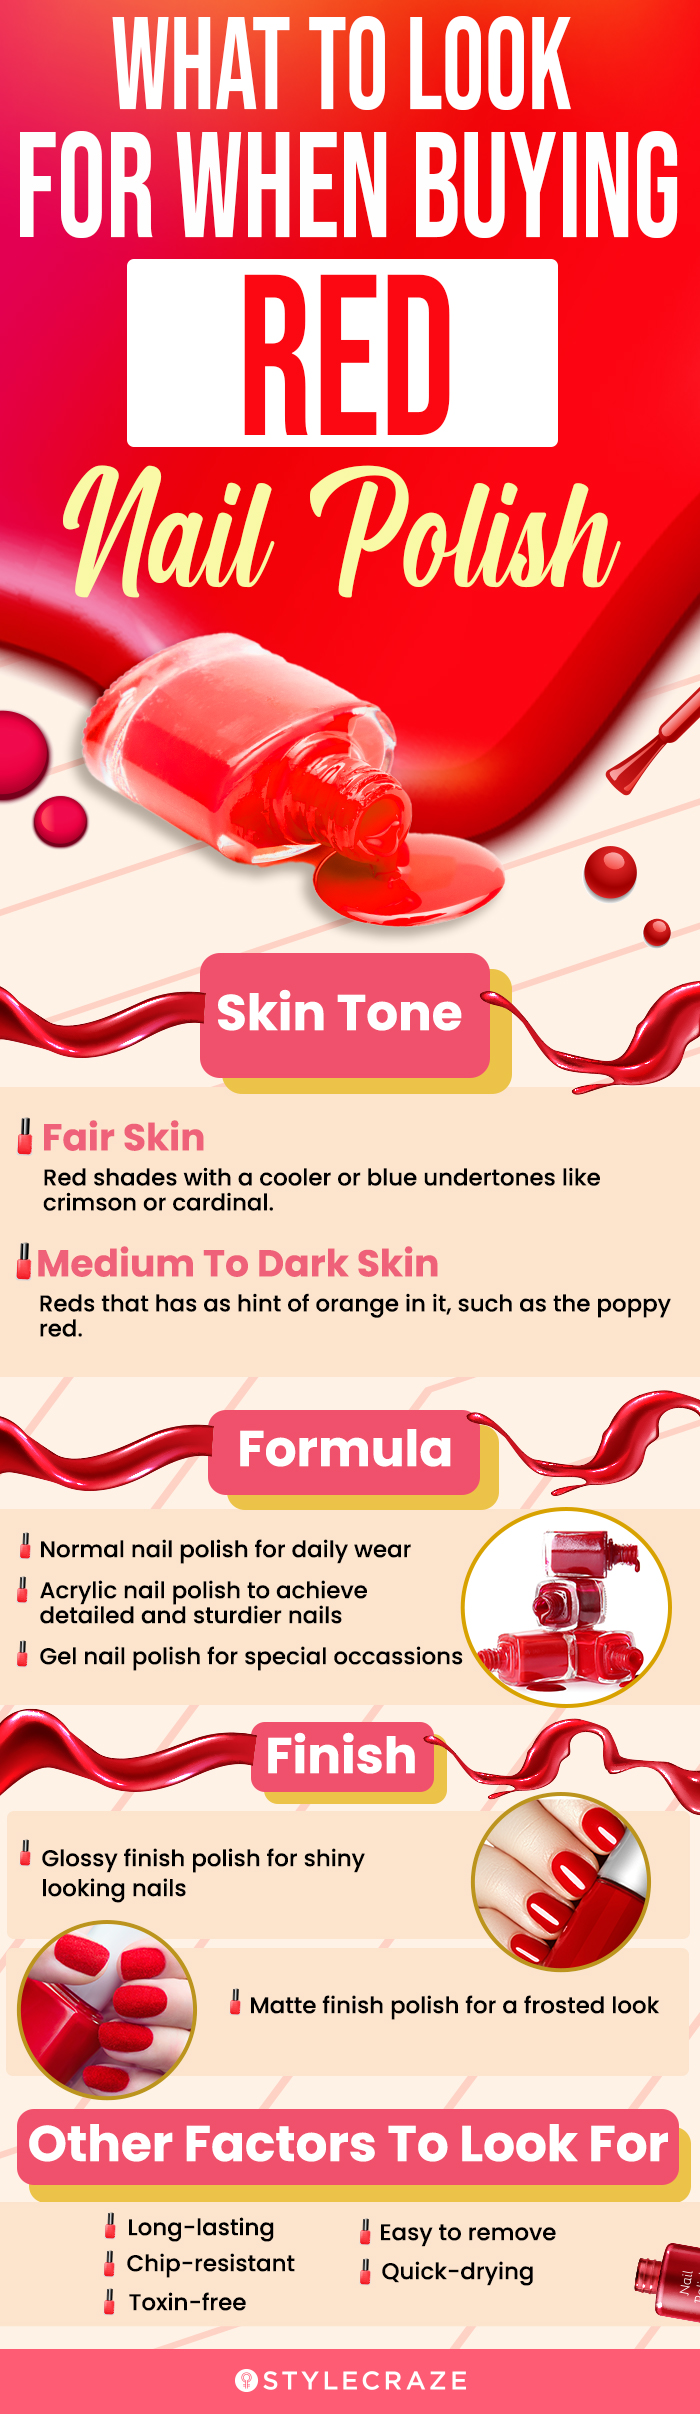 What To Look For When Buying Red Nail Polish (infographic)